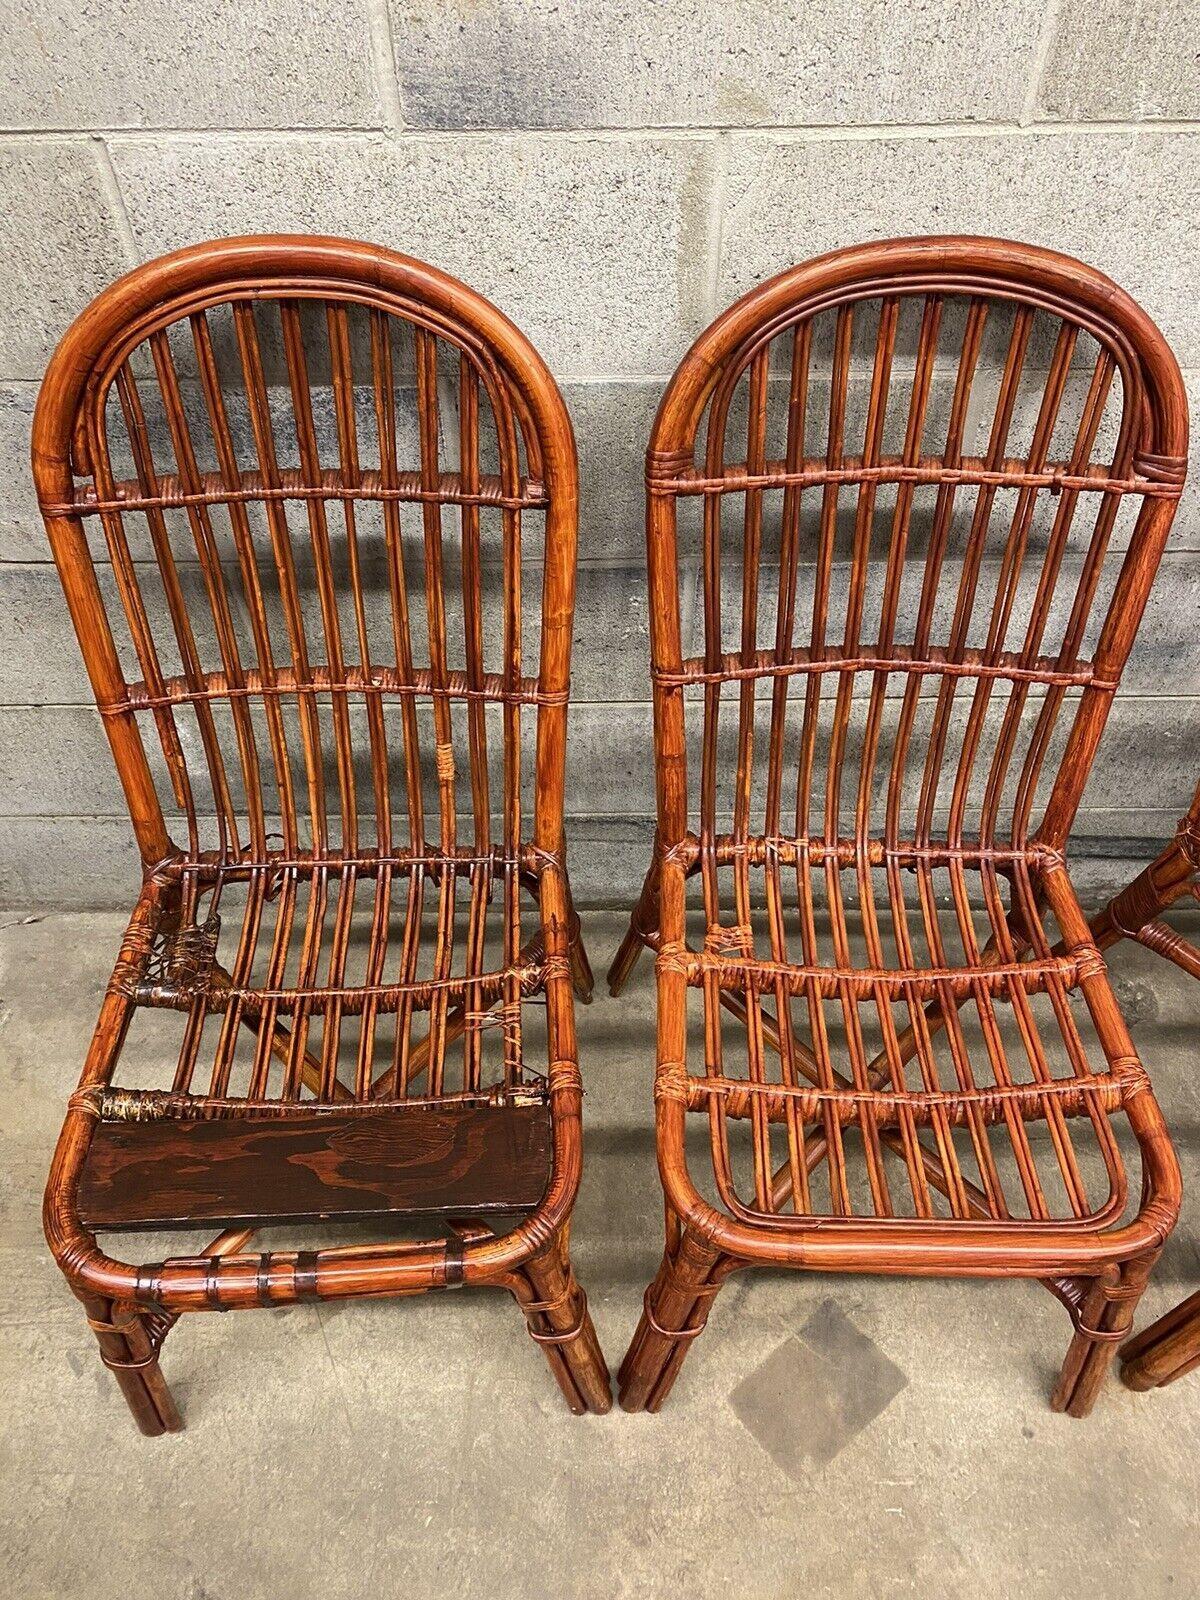 Vintage Hollywood Regency Palm Beach Bamboo Dining Side Chairs - Set of 4 For Sale 4